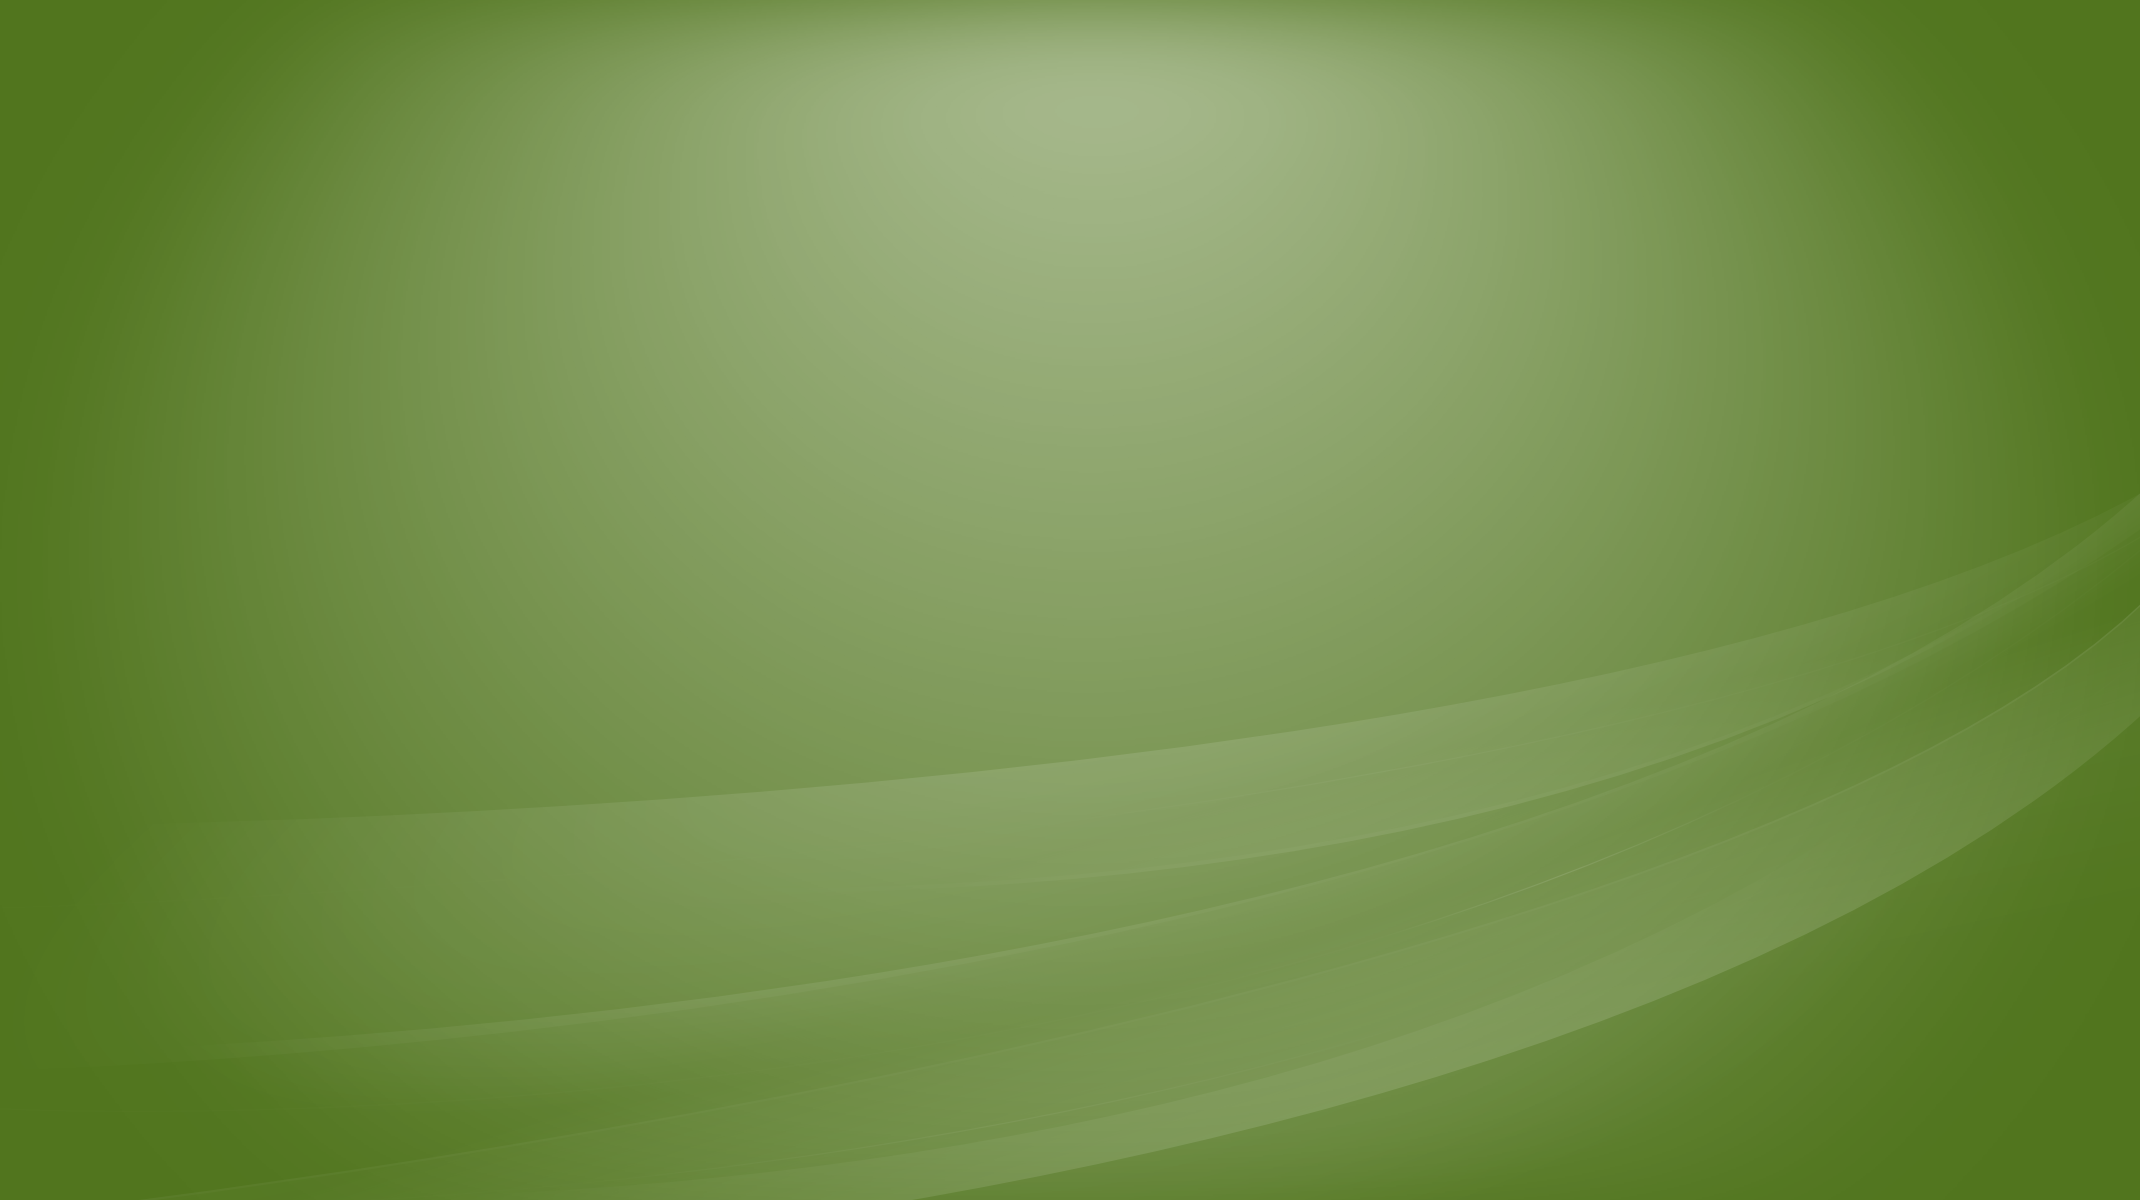 Linux Mint Wallpapers 2140x1200 HQ Wallpapers